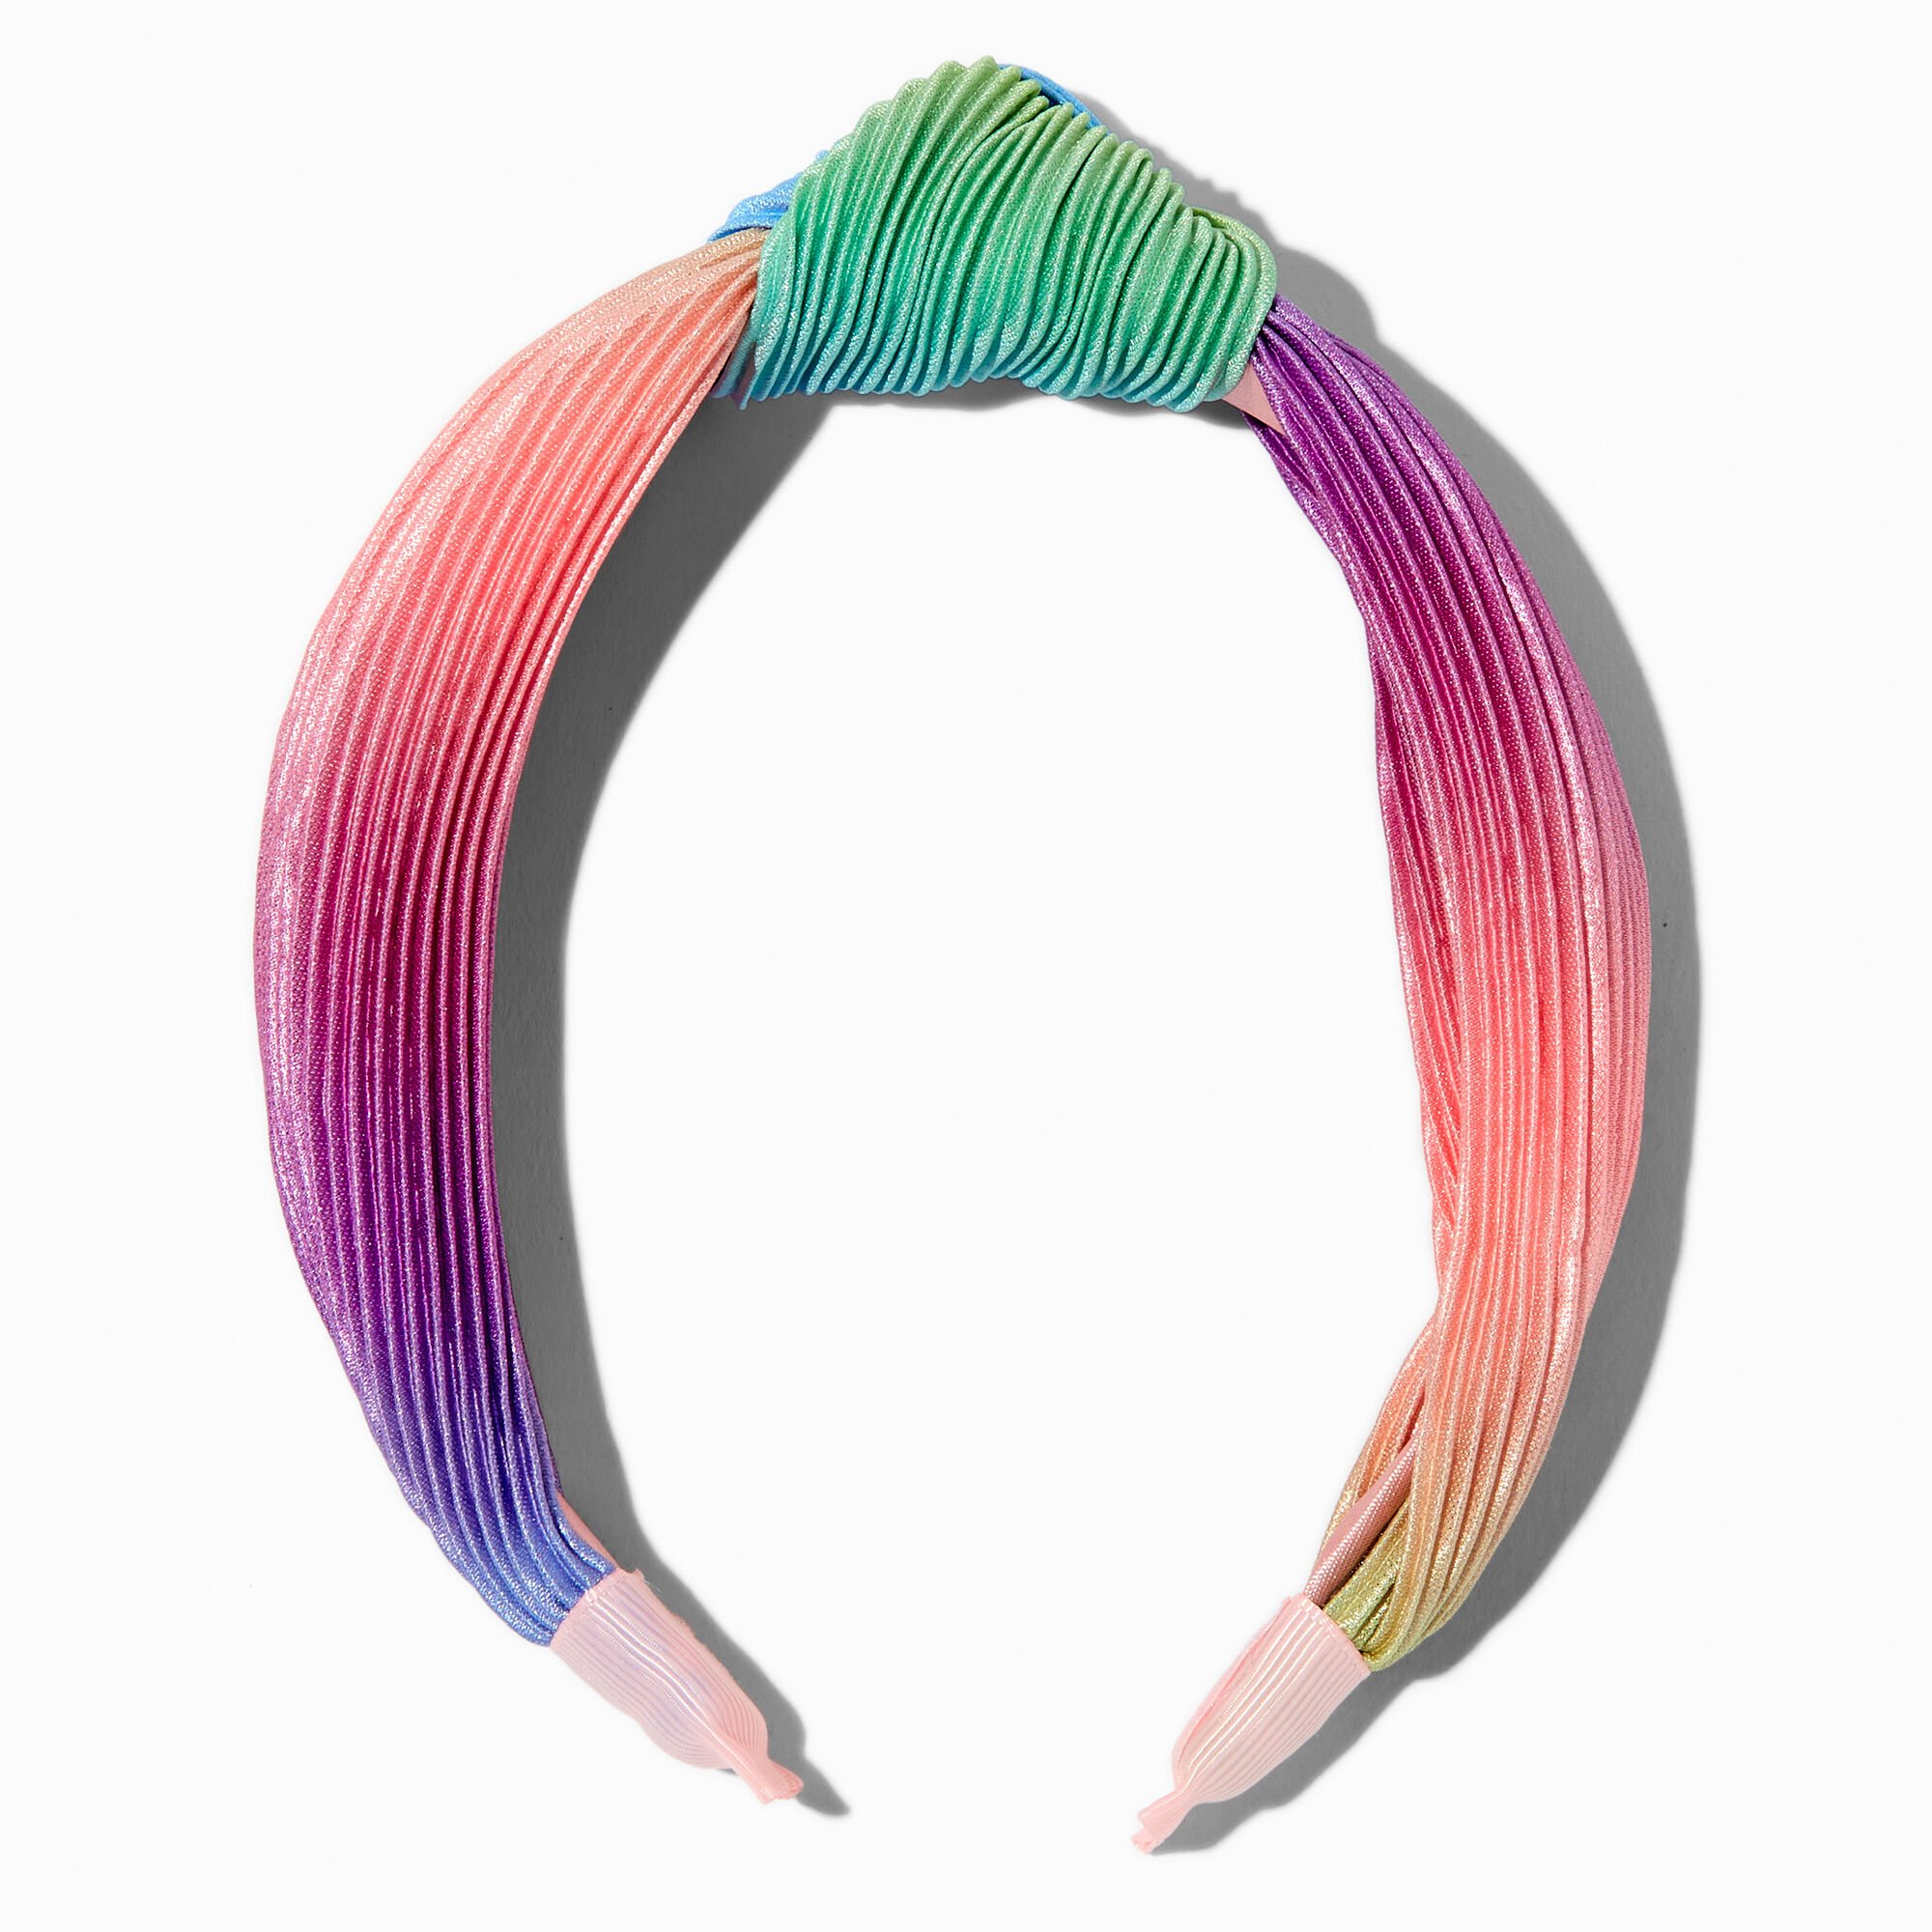 View Claires Pleated Knotted Headband Rainbow information